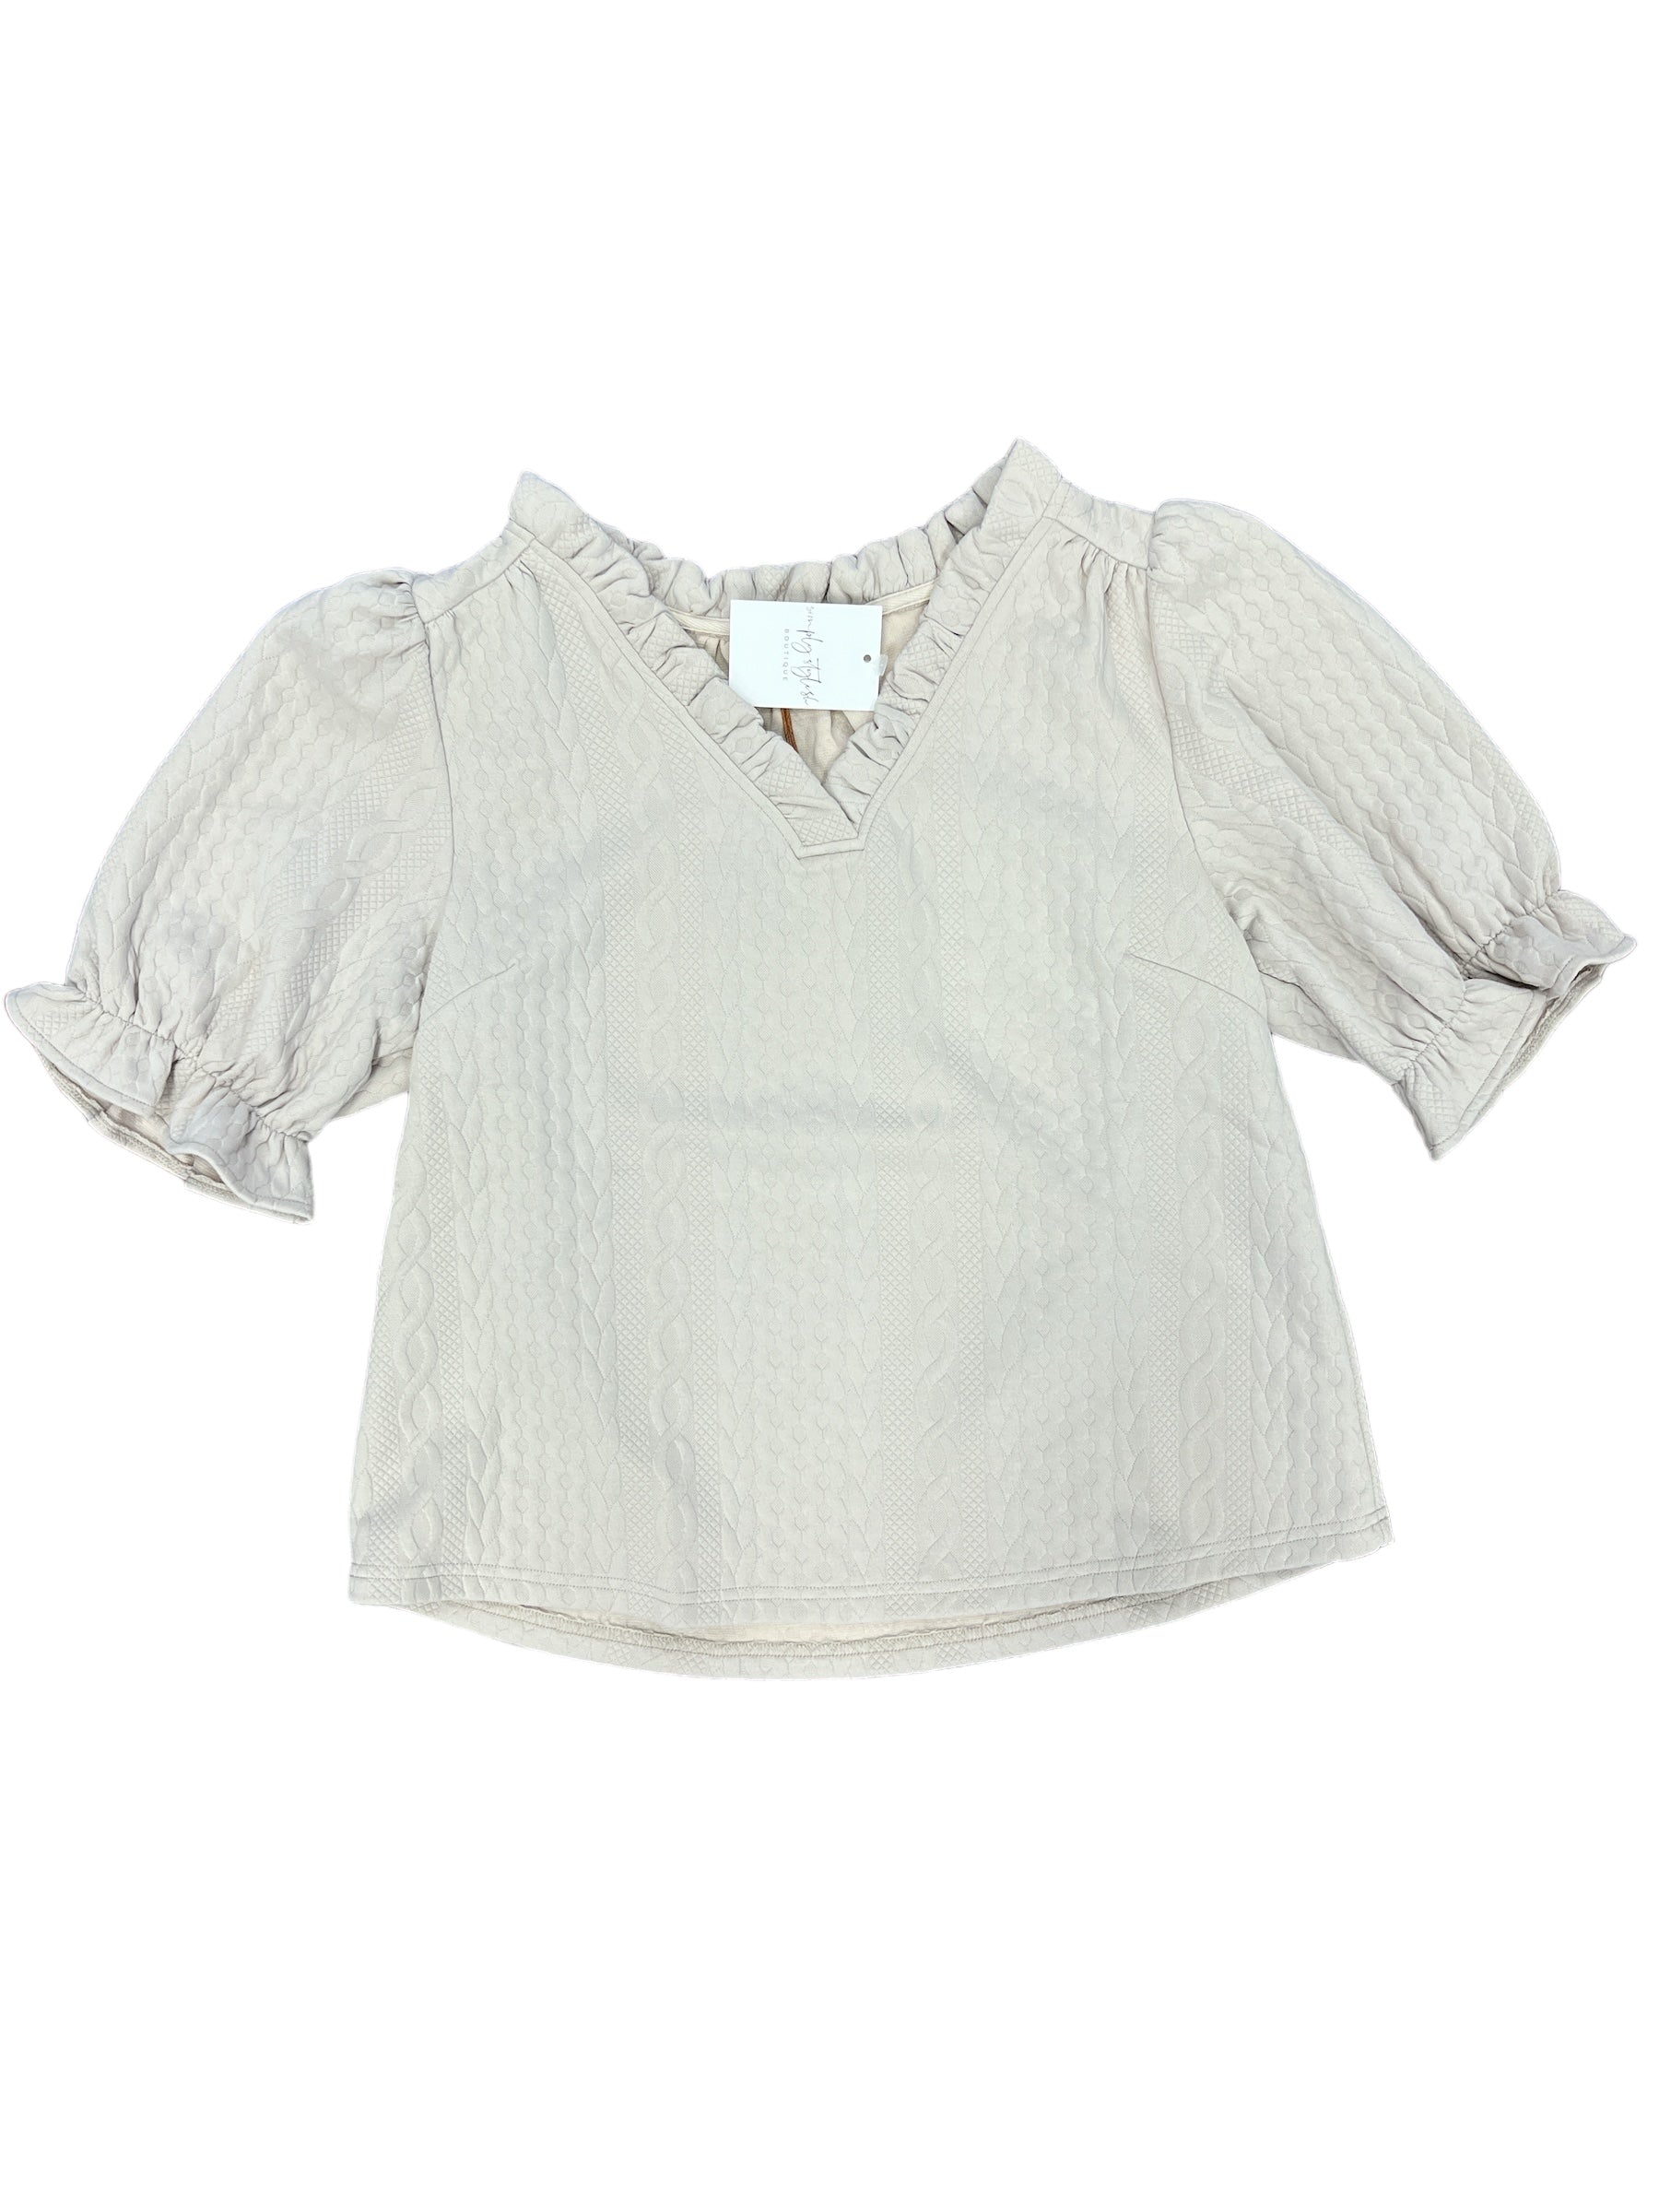 Hallie Top-130 Dressy Tops & Blouses-voy-Simply Stylish Boutique | Women’s & Kid’s Fashion | Paducah, KY